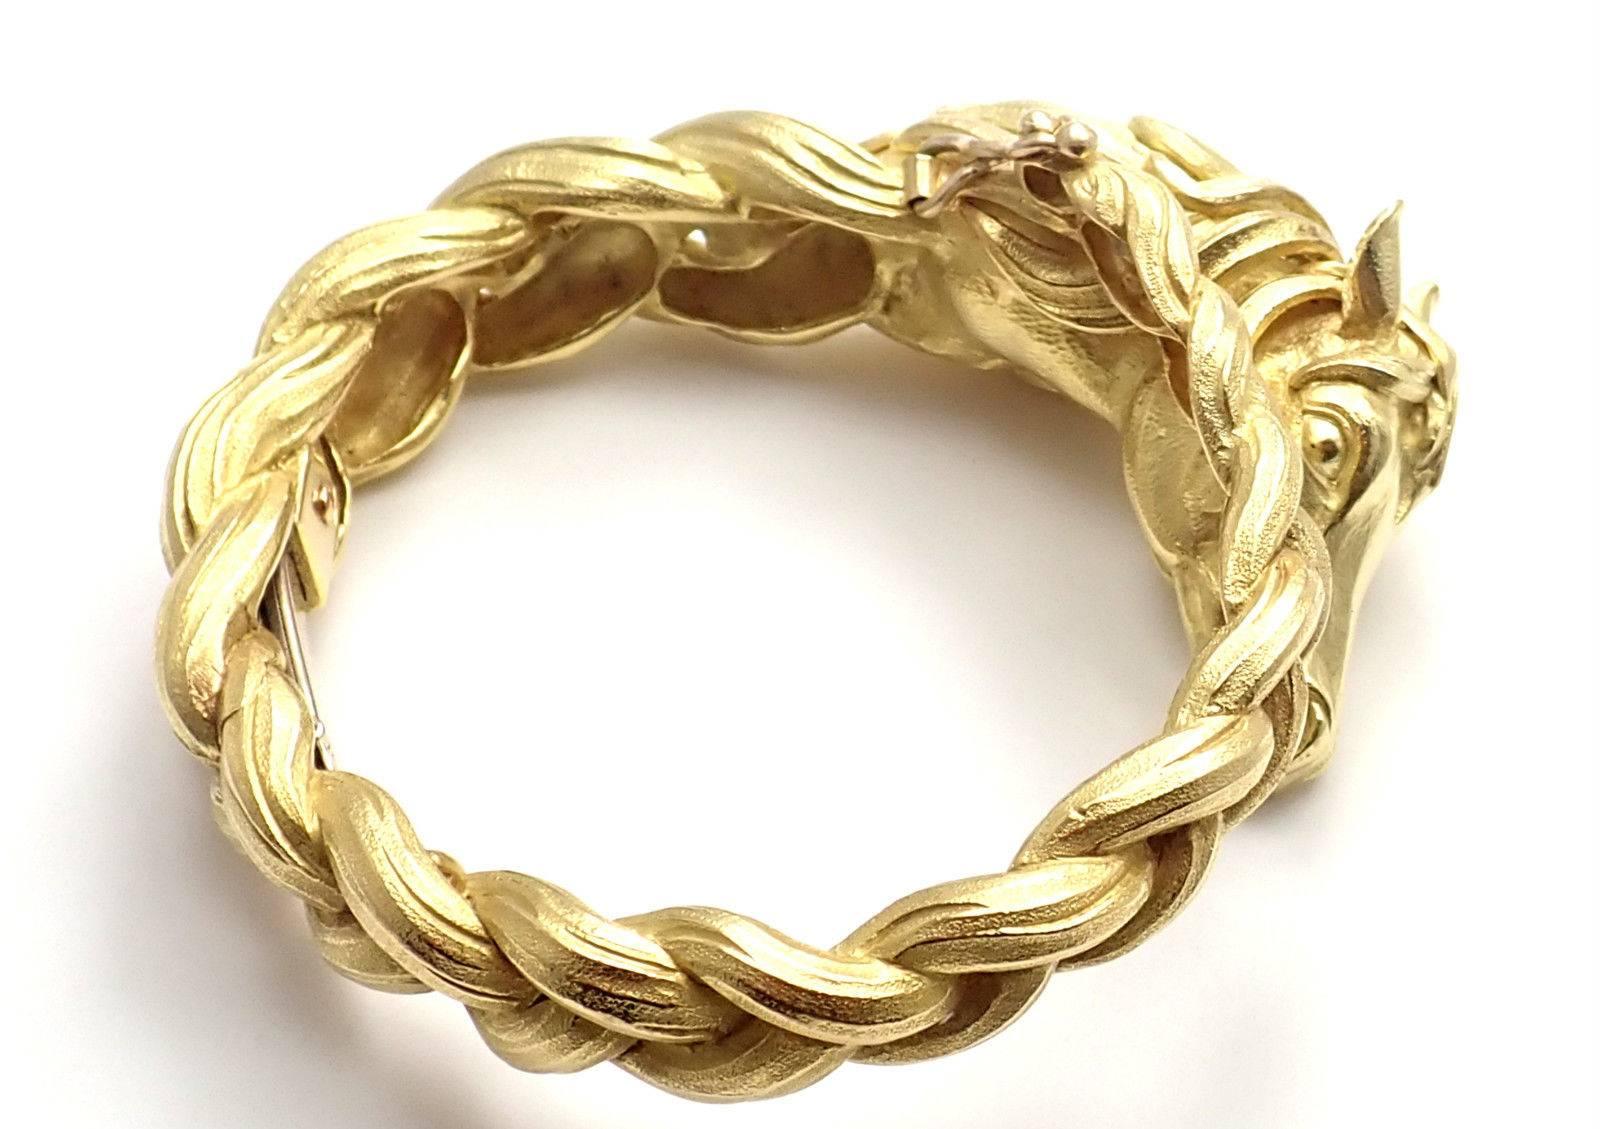 18k Yellow Gold Sculpted Horse Bangle Bracelet by Hermes. 
Details: 
Length: Length: 7" 
Width: 1"
Weight: 125.4 grams
Stamped Hallmarks: Hermes Paris 72507 French Hallmarks
*Free Shipping within the United States*
YOUR PRICE: